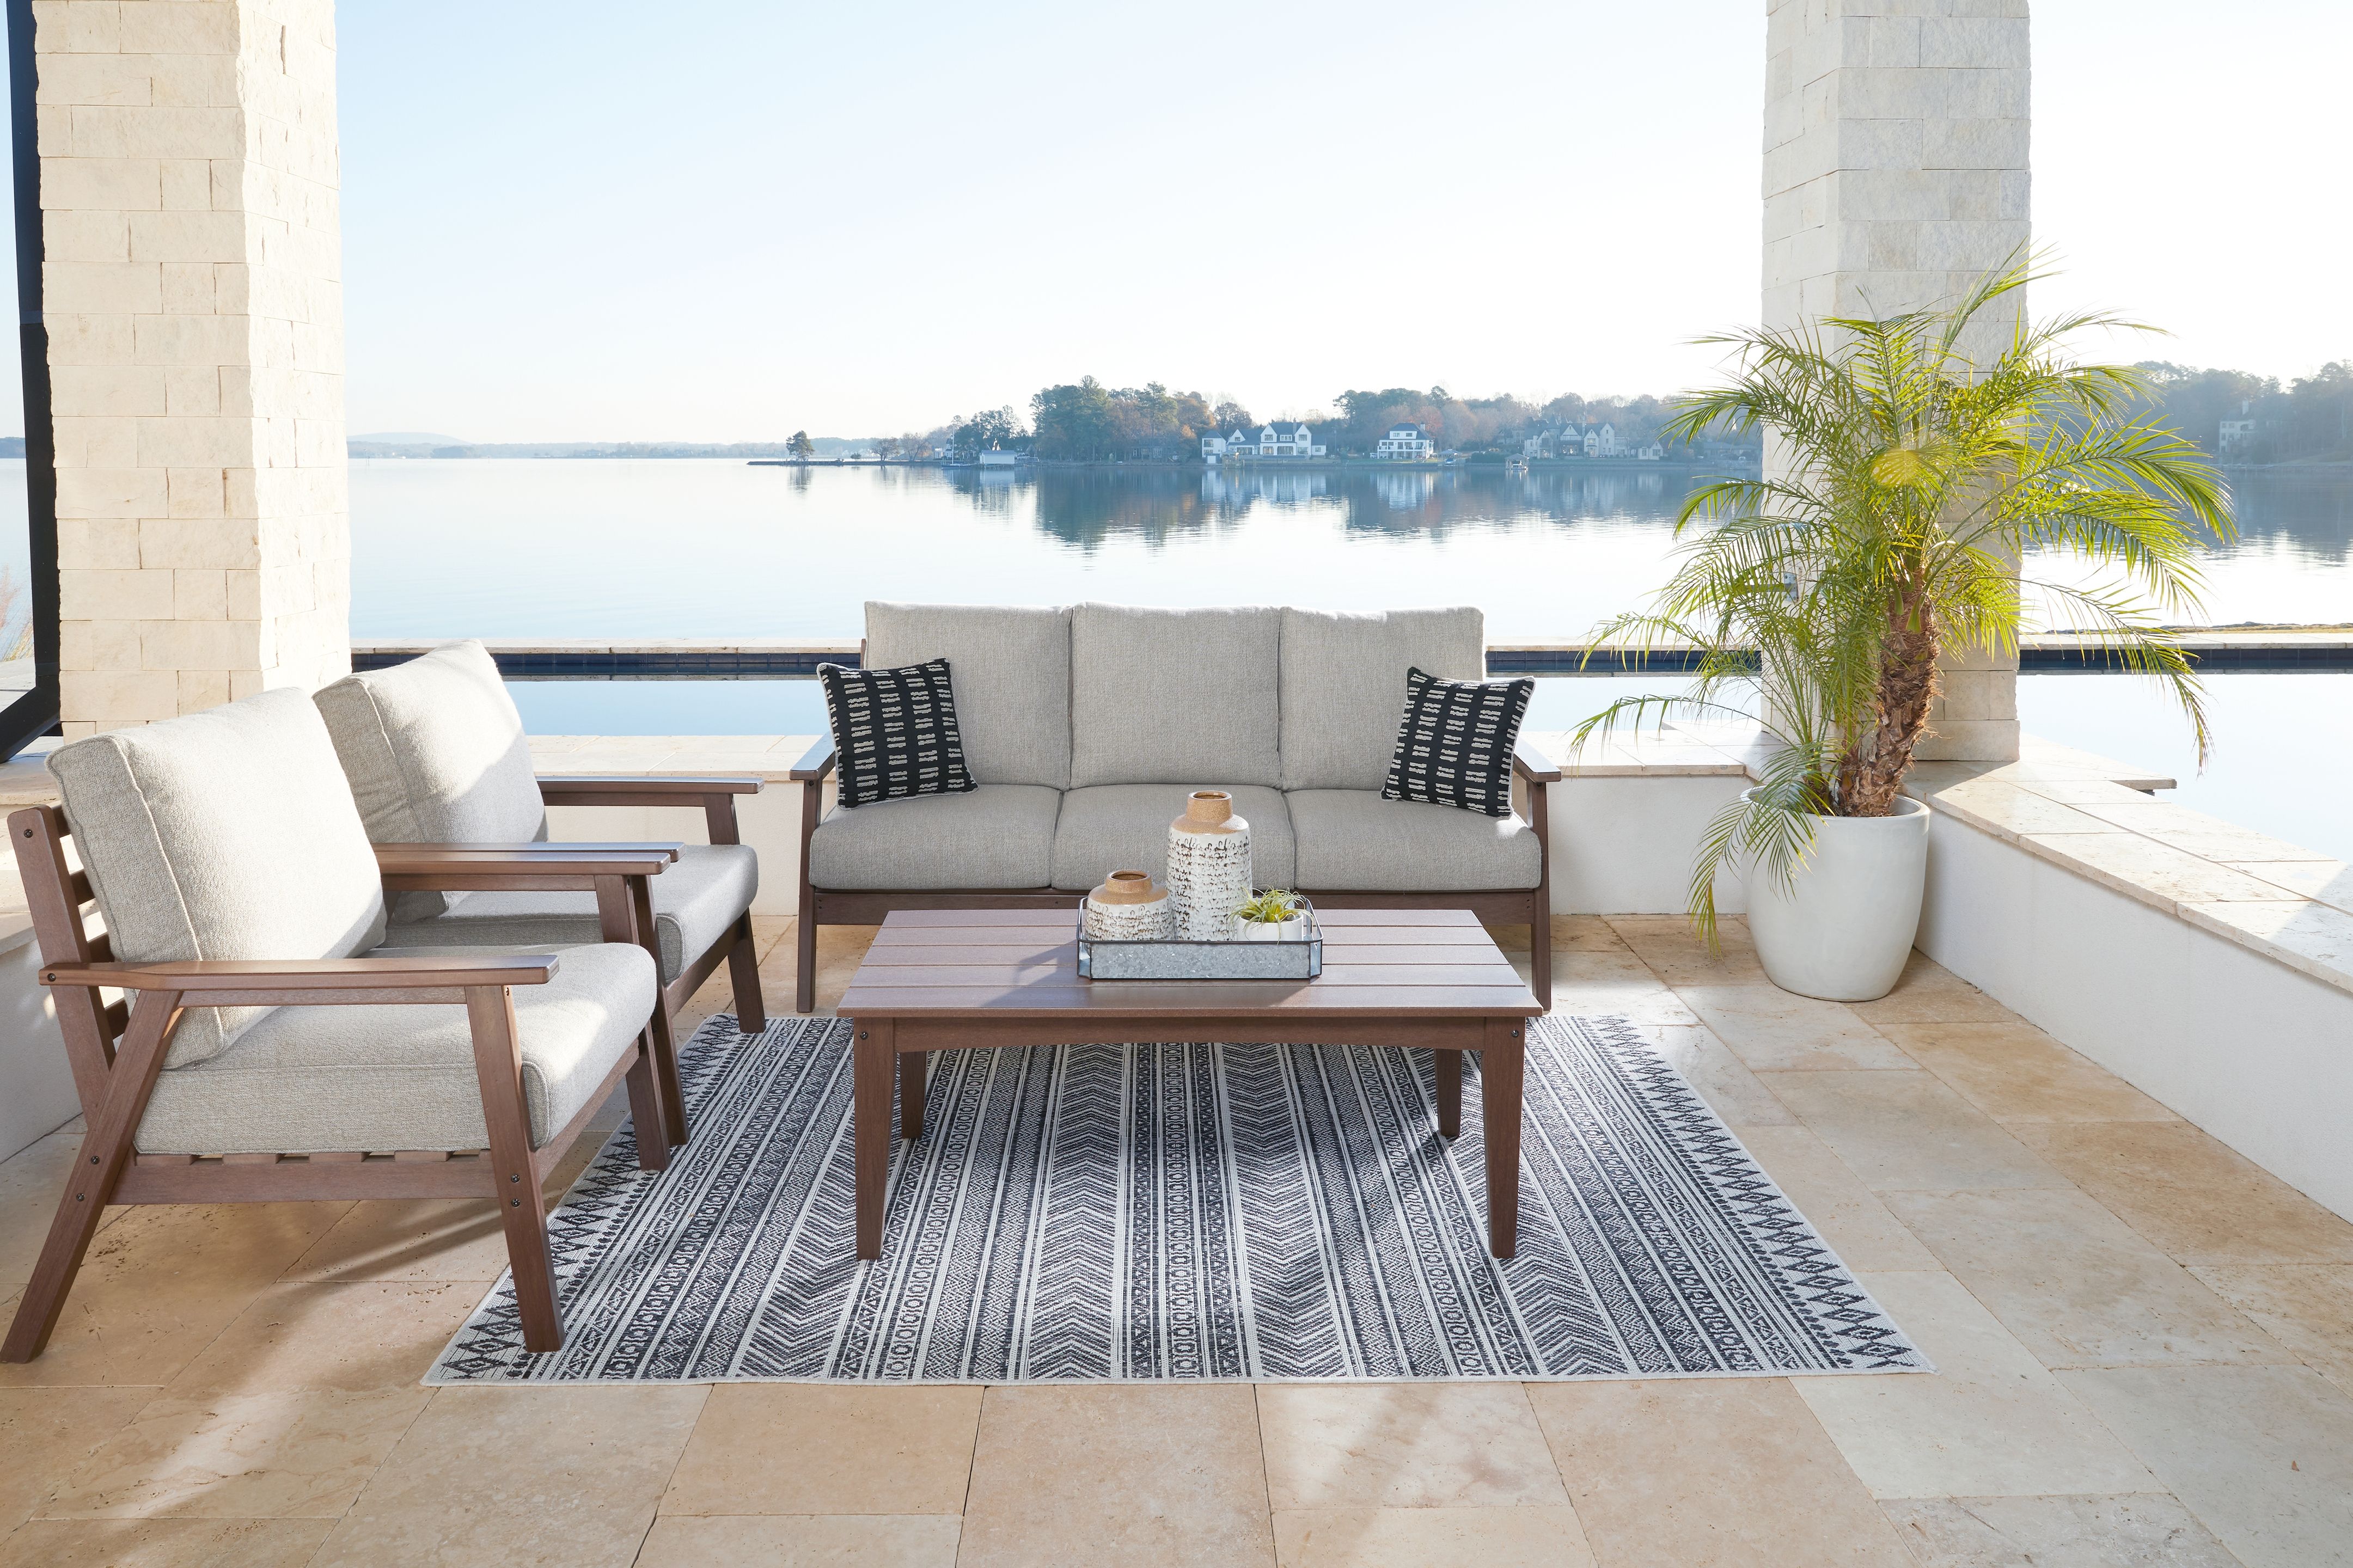 2018 Emmeline Outdoor Sofa, 2 Lounge Chairs And Coffee Table P420p2signature  Designashley At Sylvan Furniture With Outdoor 2 Arm Chairs And Coffee Table (View 7 of 15)